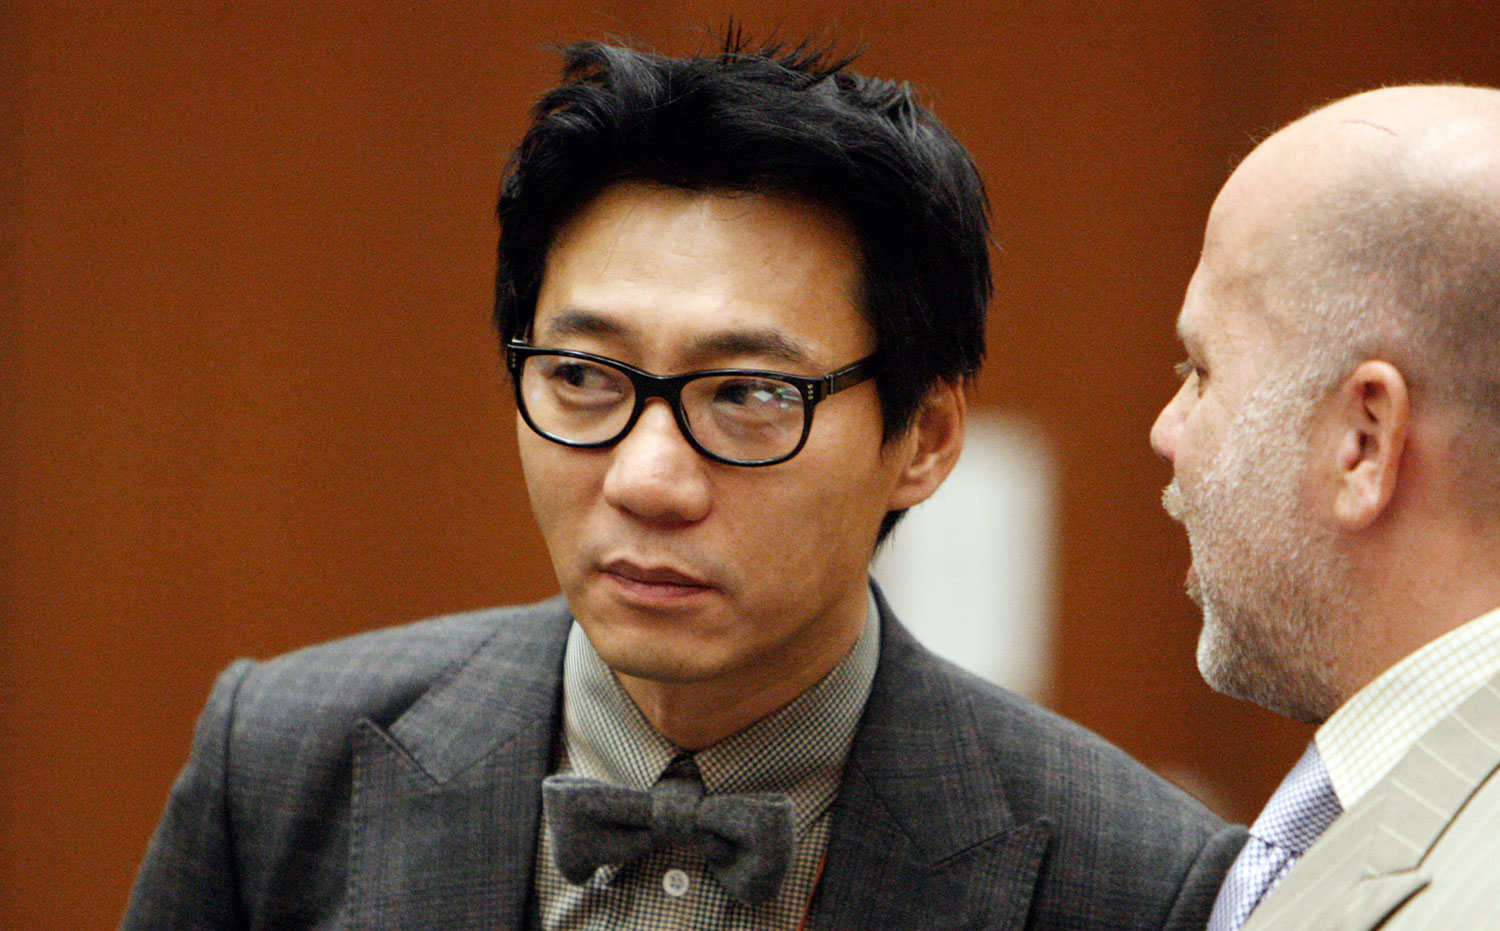 Young Lee stands with his attorney Philip Kent Cohen, right, during his arraignment in the Los Angeles Criminal Courts Building in Los Angeles in 2012. (AP)